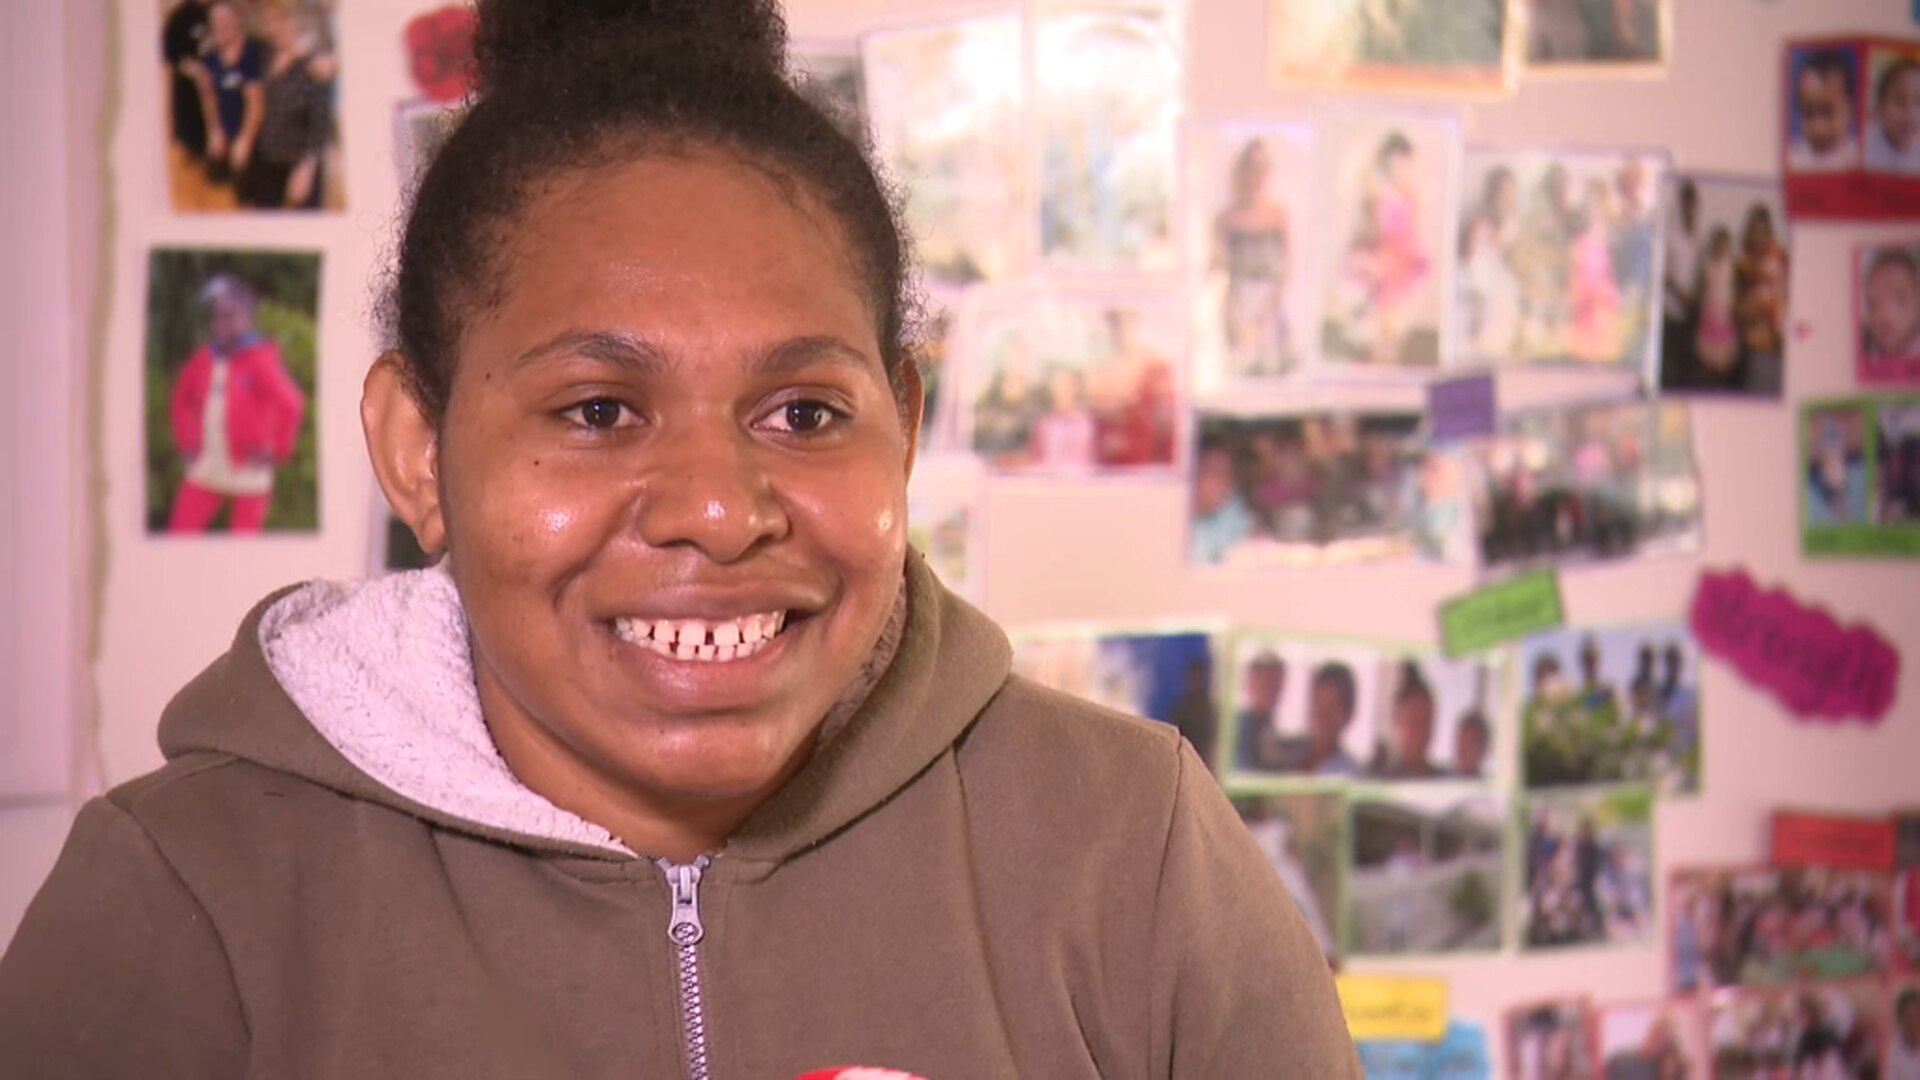 Surgery will lengthen the leg of Papua New Guinea teen - Epworth HealthCare